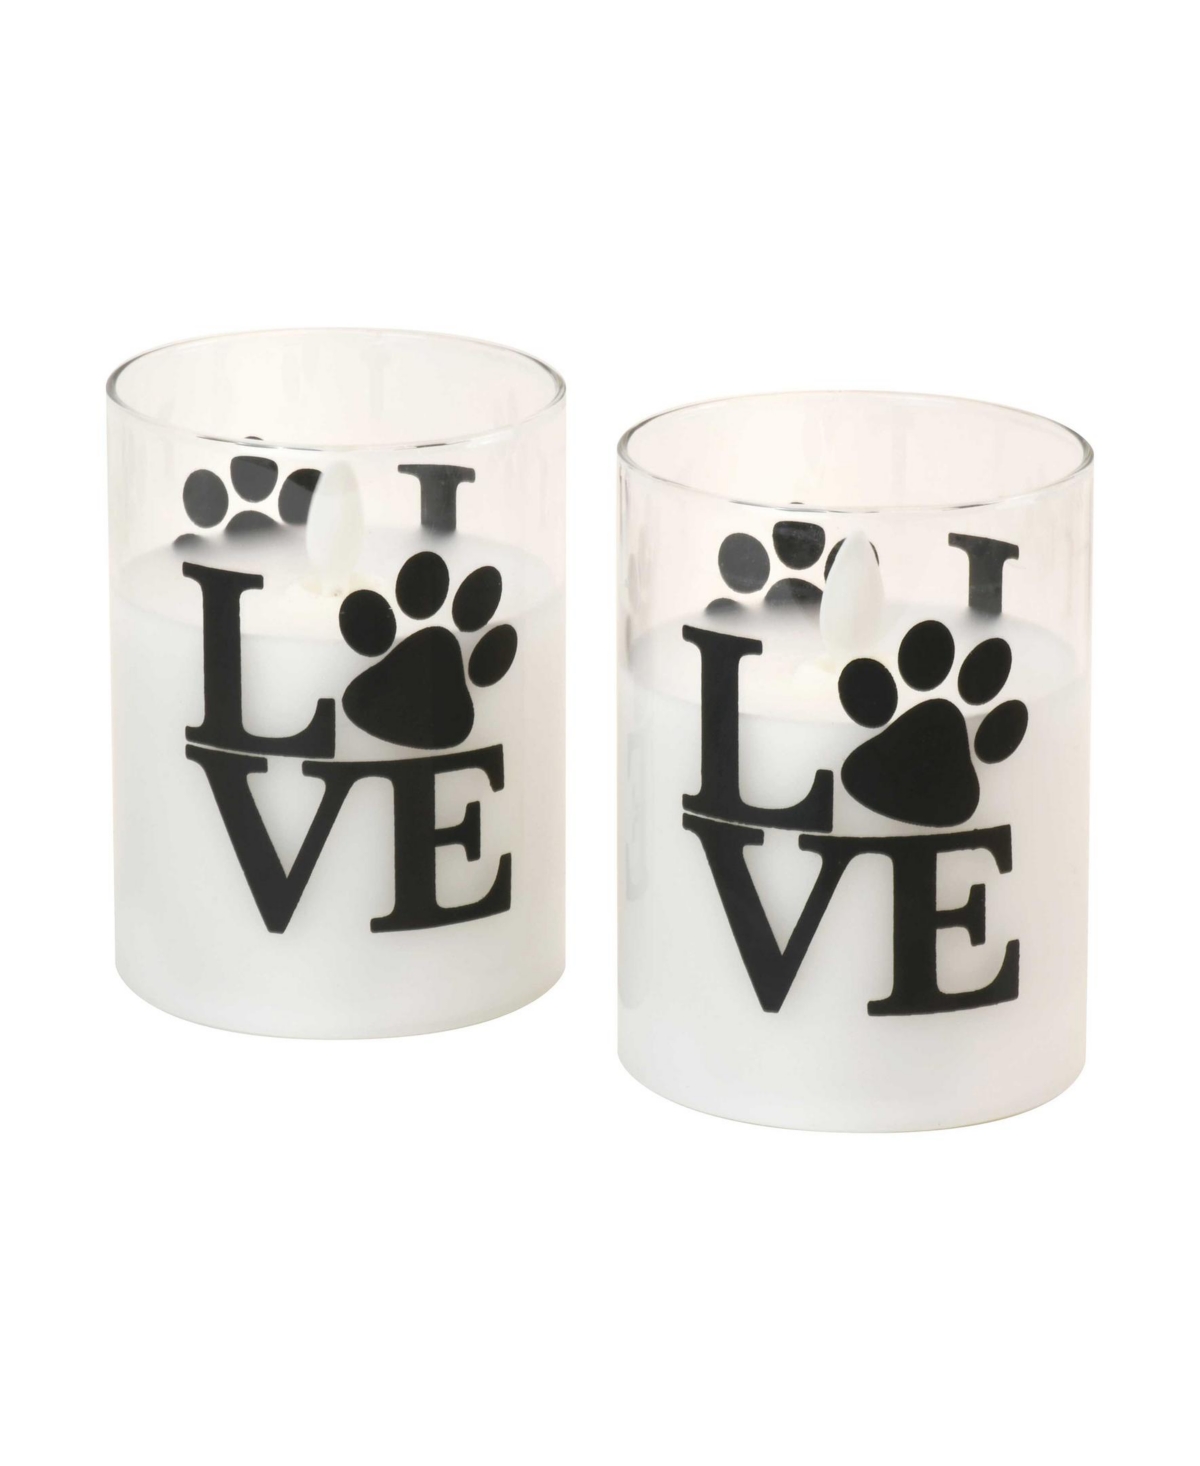 Jh Specialties Inc/lumabase Battery Operated Love Paw Led Glass Candles With Moving Flame, Set Of 2 In Black